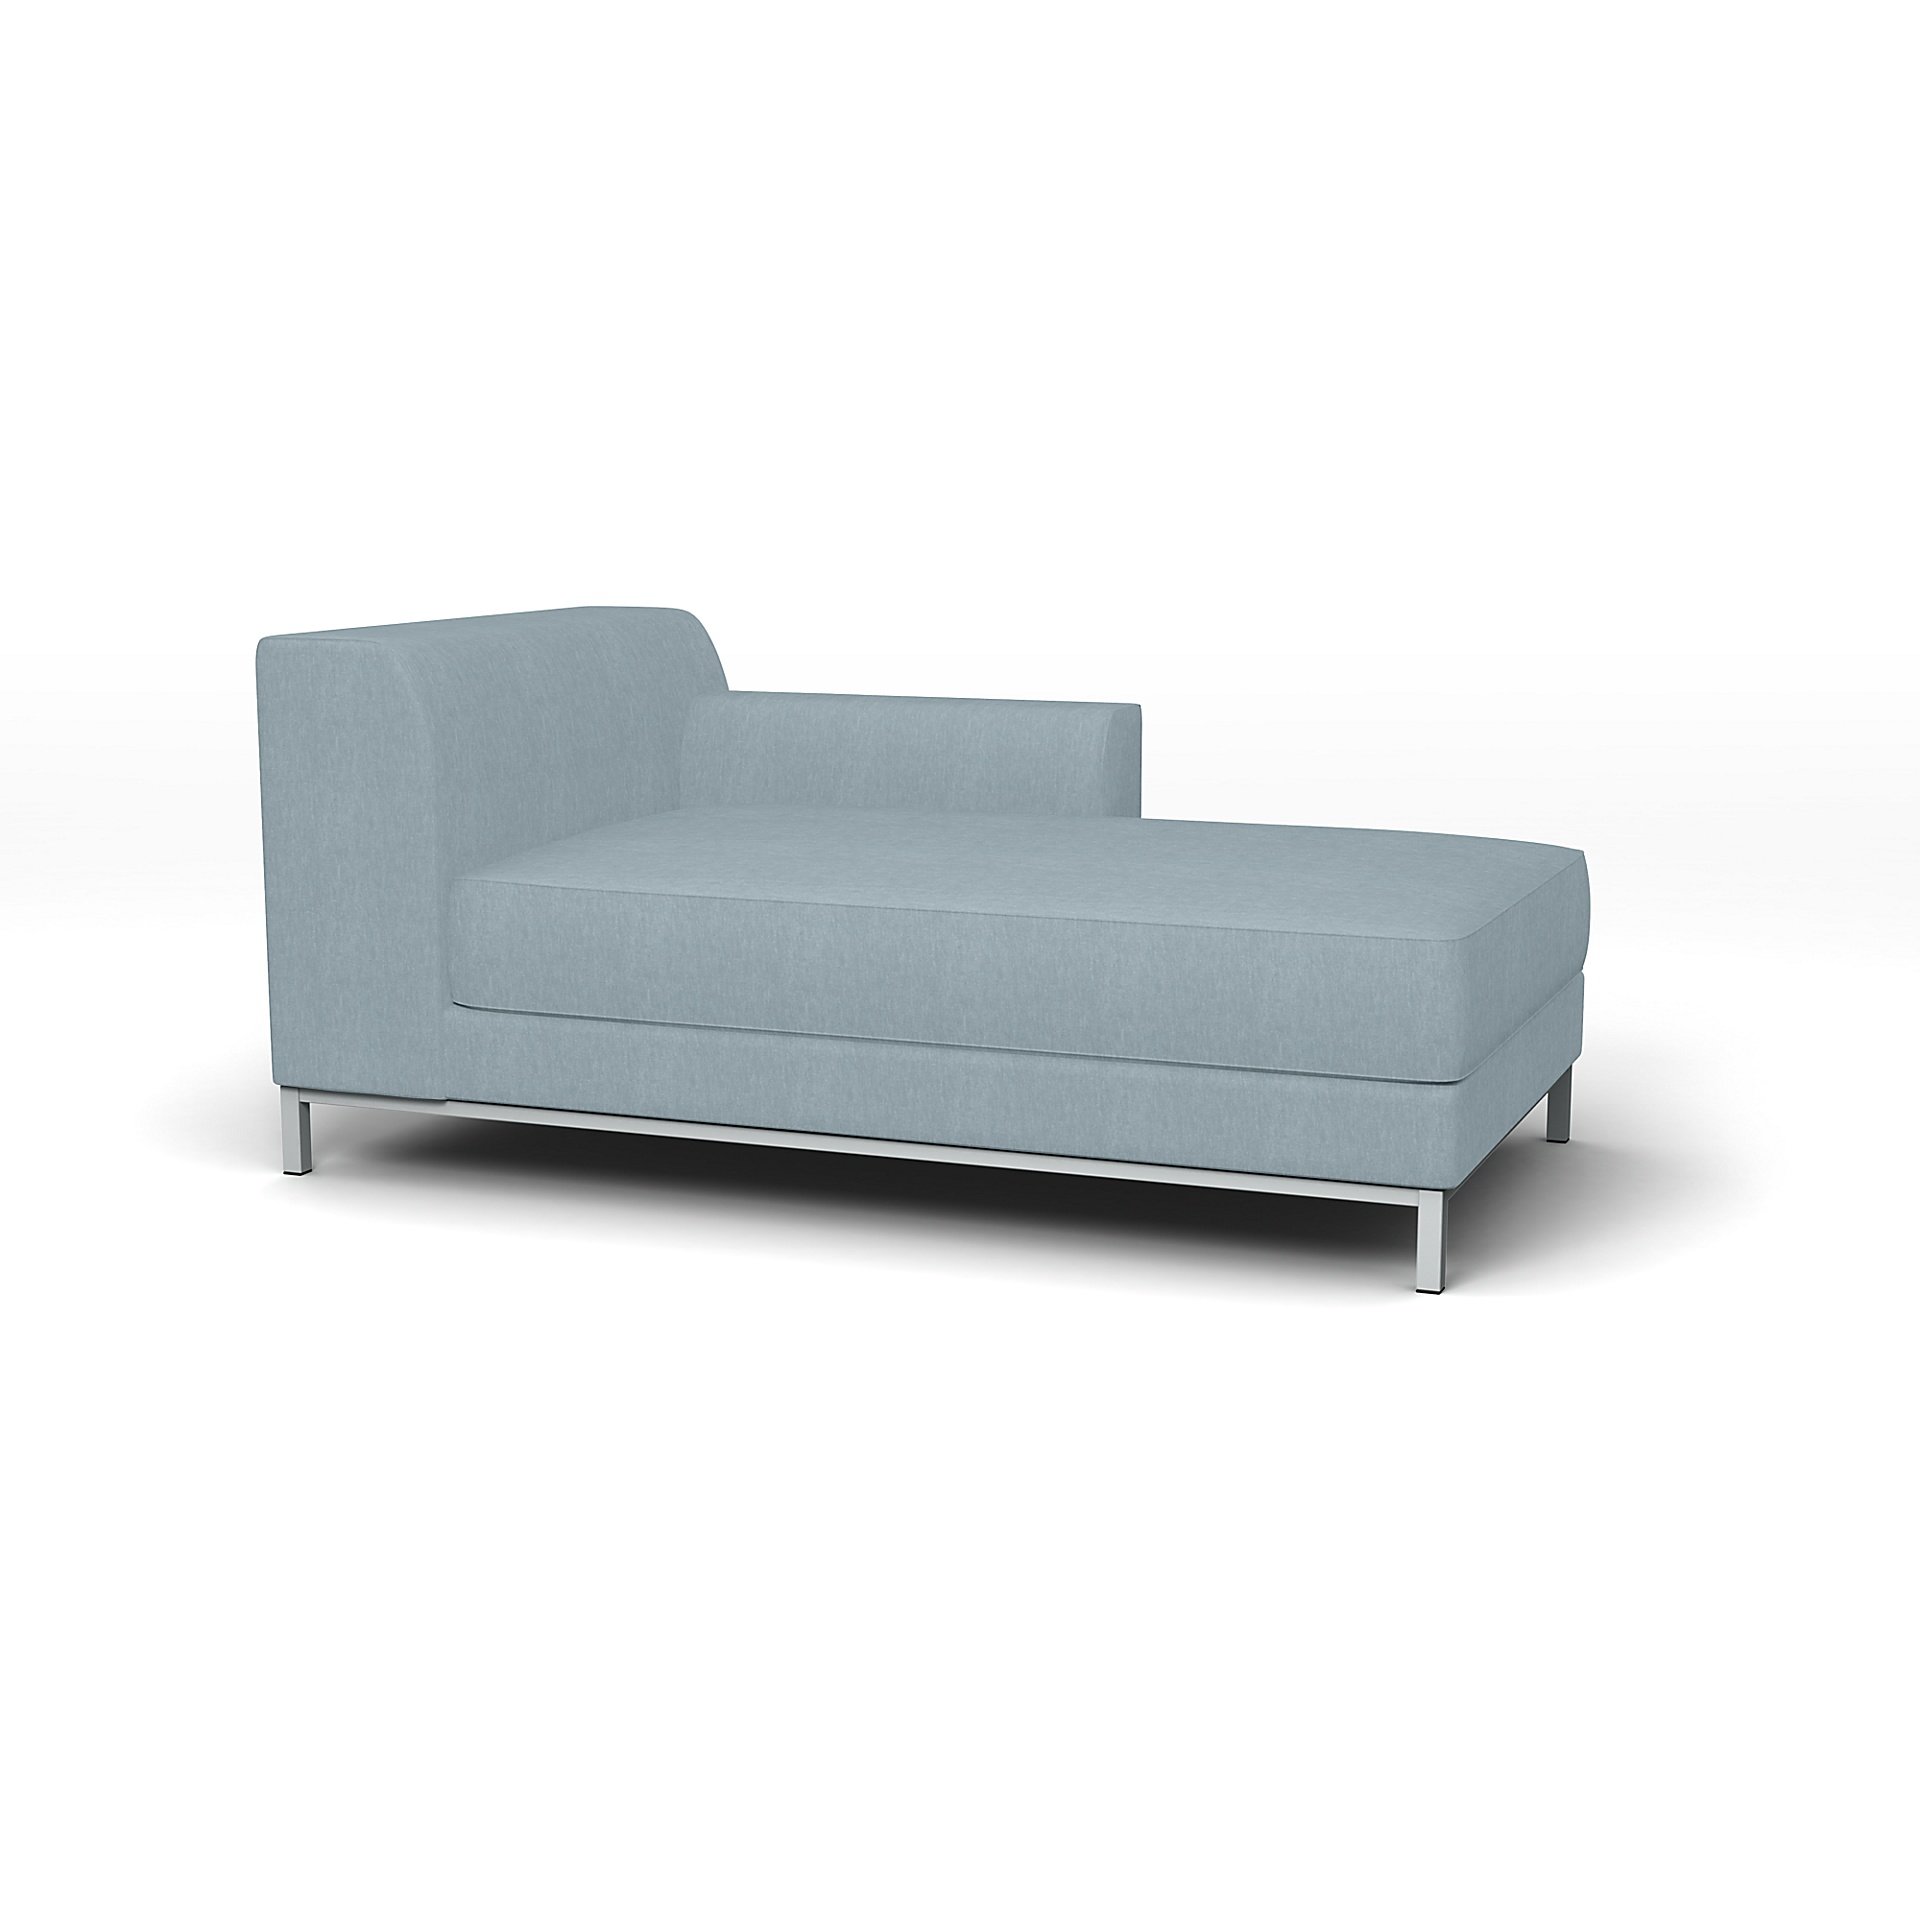 IKEA - Kramfors Chaise Longue with Right Arm Cover, Dusty Blue, Linen - Bemz